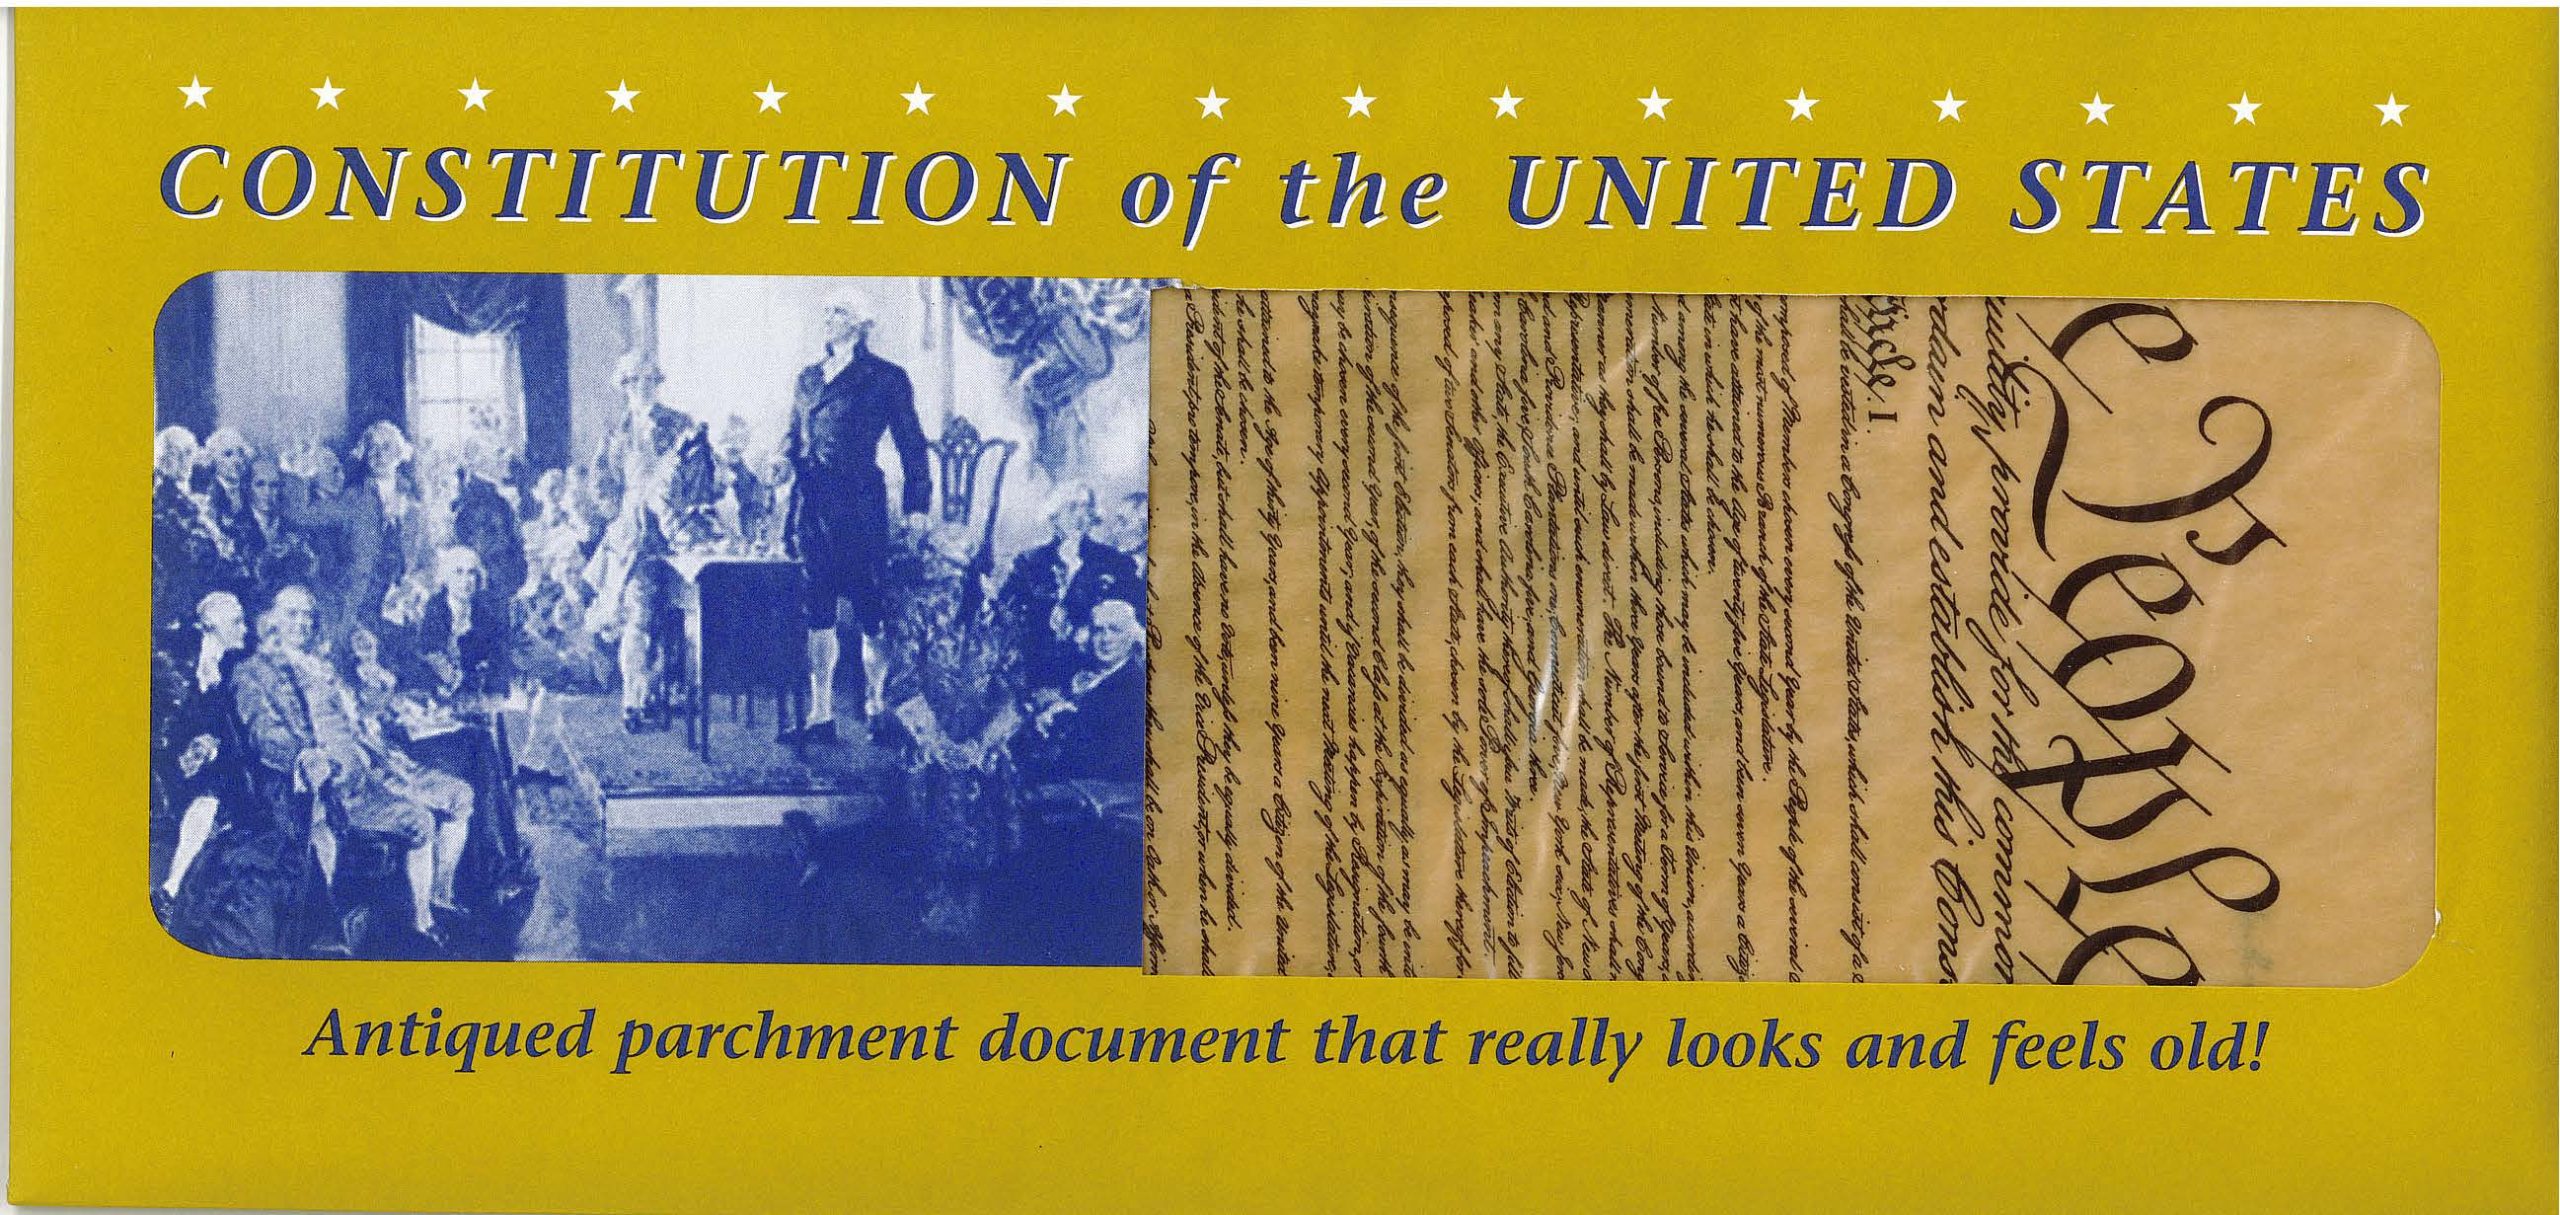 documents-constitution-of-the-united-states-walt-whitman-birthplace